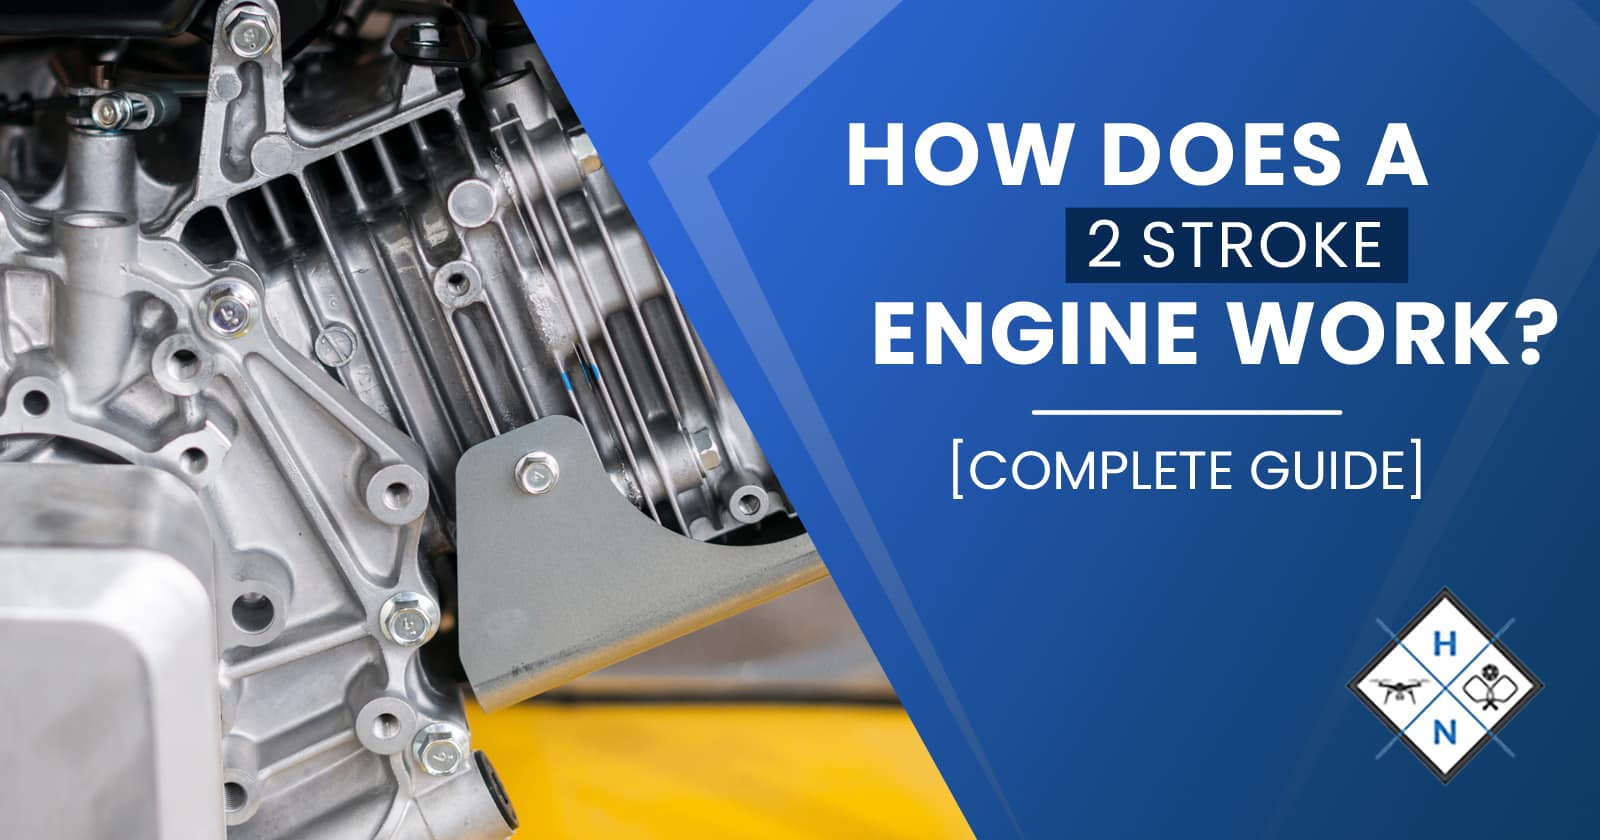 How Does a 2 Stroke Engine Work? [COMPLETE GUIDE]